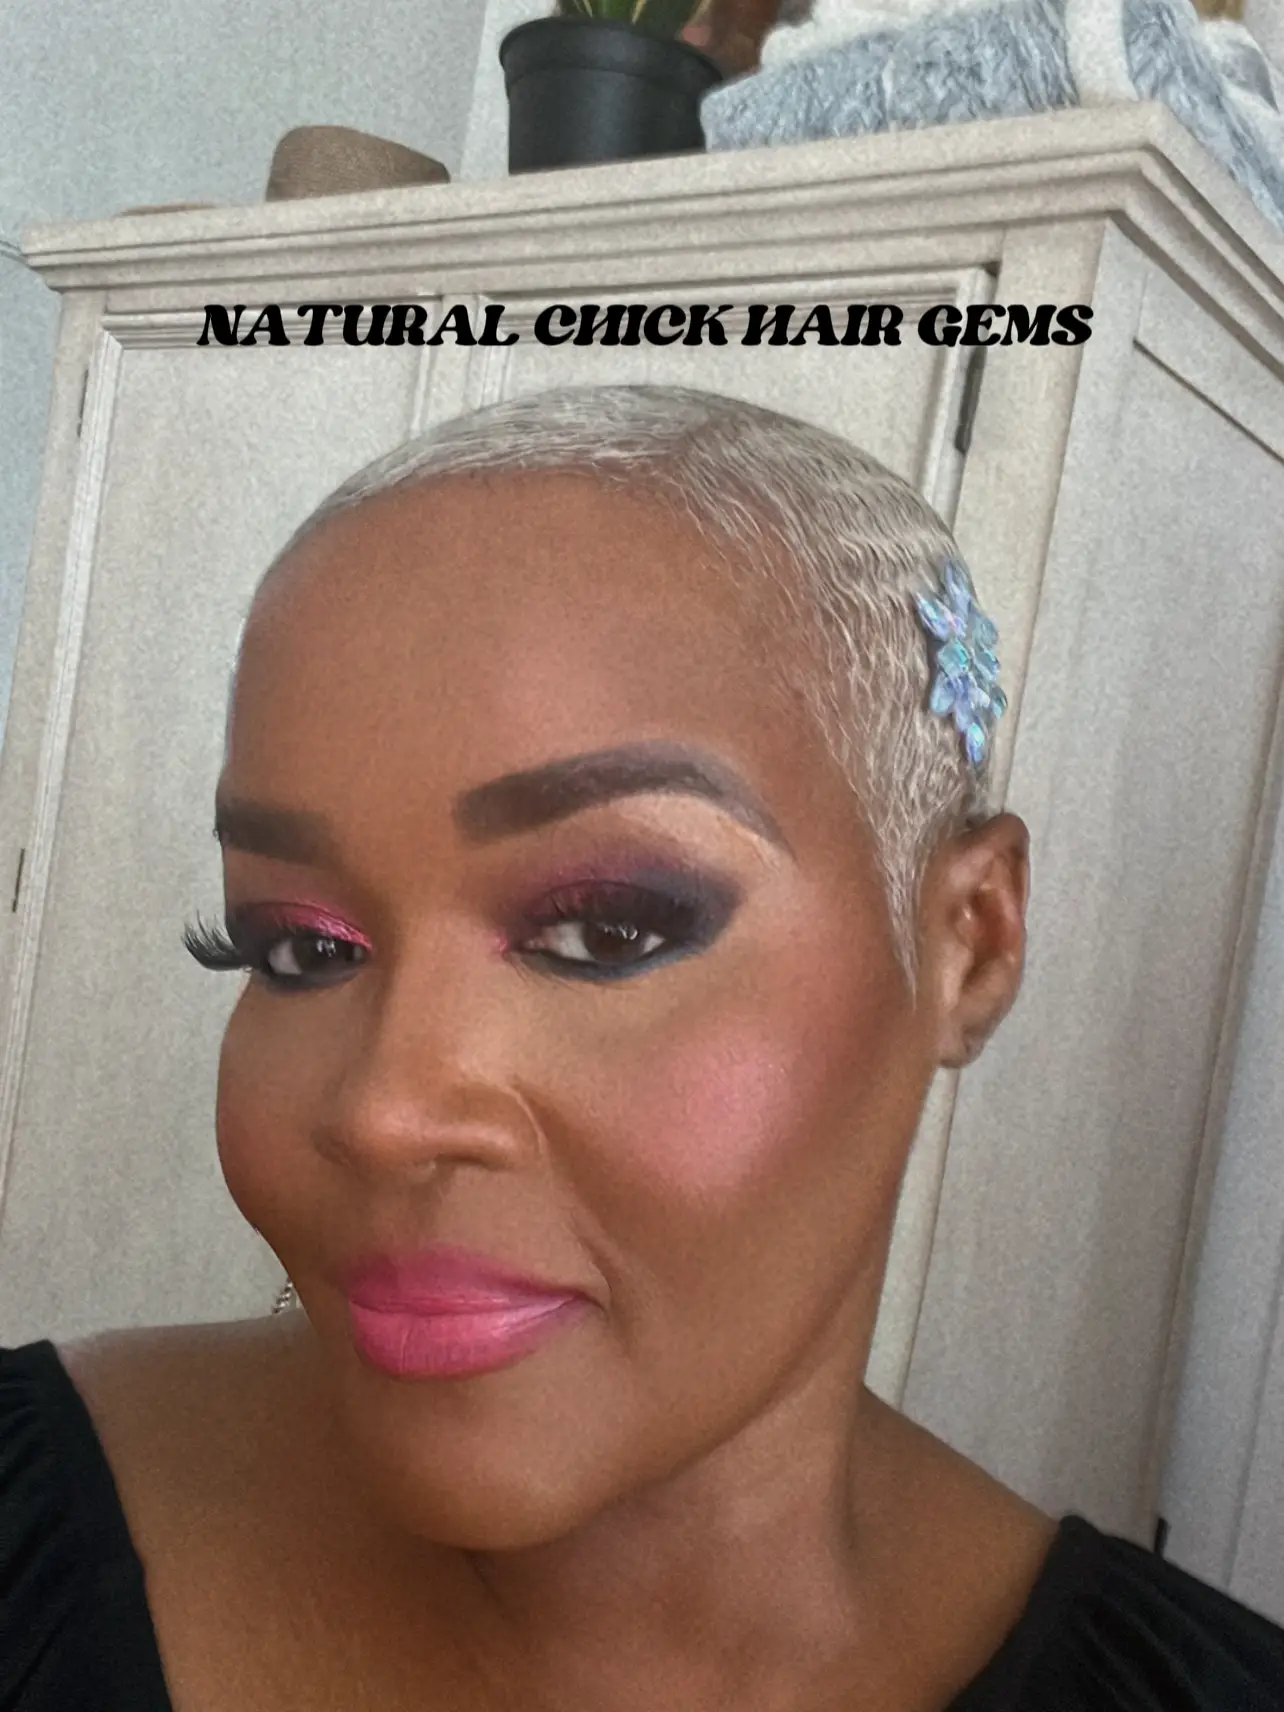 NATURAL CHICK SHORT HAIR GEMS  Gallery posted by Short Hair Gems